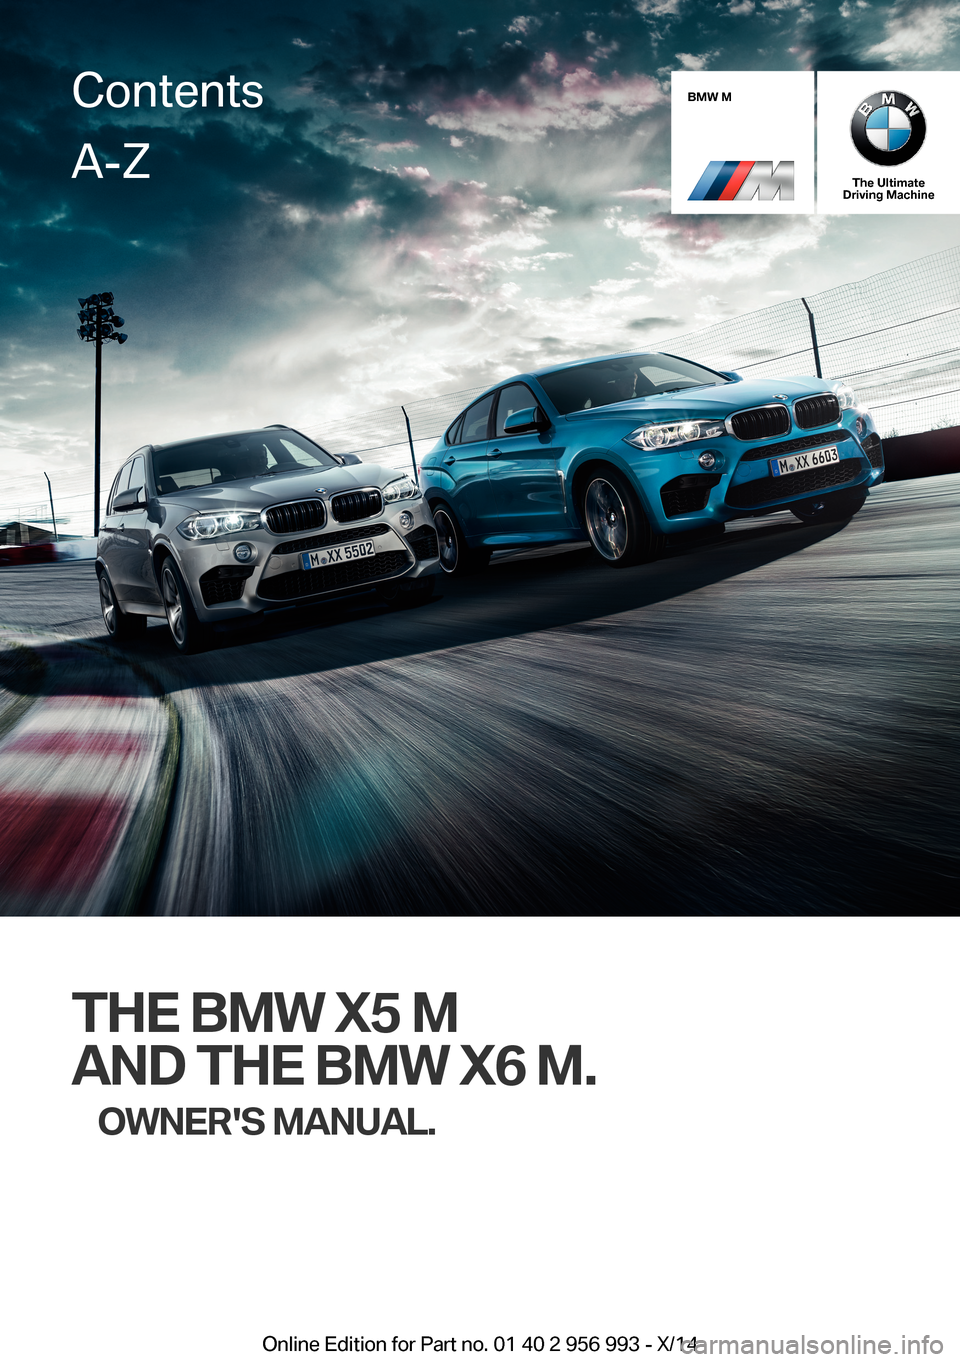 BMW X6M 2014 F86 Owners Manual BMW M
The UltimateDriving Machine
THE BMW X5 M
AND THE BMW X6 M.
OWNERS MANUAL.
ContentsA-Z
Online Edition for Part no. 01 40 2 956 993 - X/14   